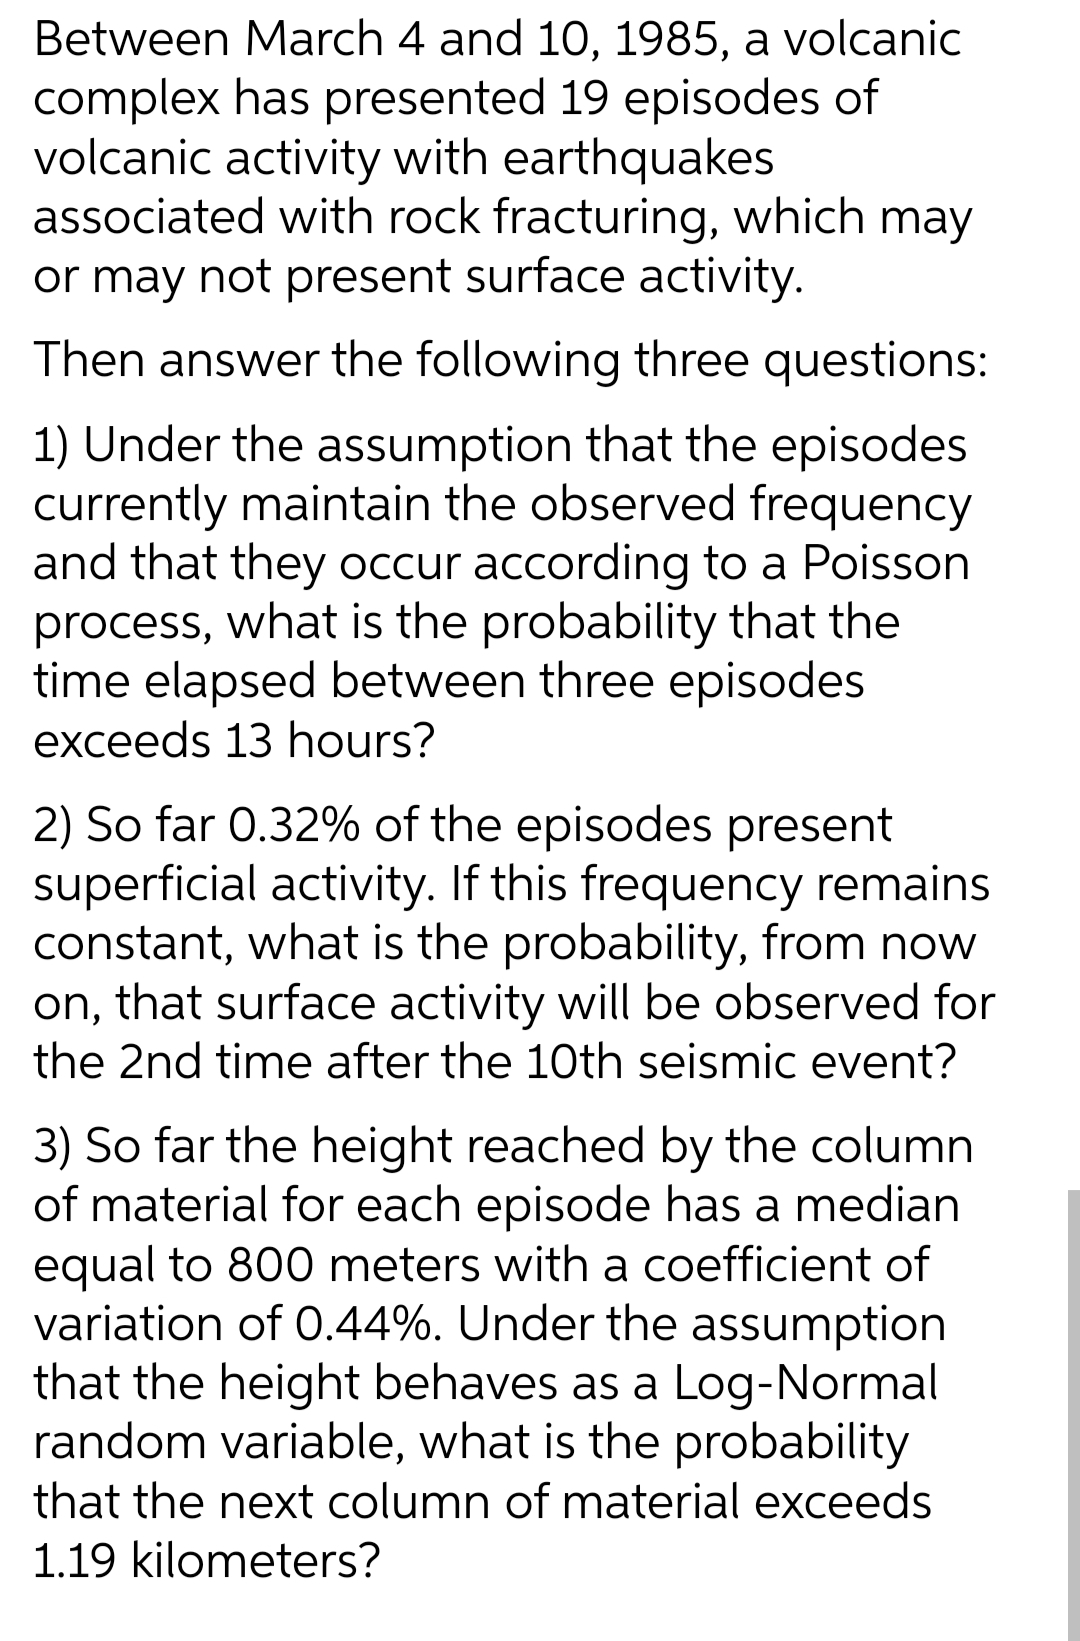 Between March 4 and 10, 1985, a volcanic
complex has presented 19 episodes of
volcanic activity with earthquakes
associated with rock fracturing, which may
or may not present surface activity.
Then answer the following three questions:
1) Under the assumption that the episodes
currently maintain the observed frequency
and that they occur according to a Poisson
process, what is the probability that the
time elapsed between three episodes
exceeds 13 hours?
2) So far 0.32% of the episodes present
superficial activity. If this frequency remains
constant, what is the probability, from now
on, that surface activity will be observed for
the 2nd time after the 10th seismic event?
3) So far the height reached by the column
of material for each episode has a median
equal to 800 meters with a coefficient of
variation of 0.44%. Under the assumption
that the height behaves as a Log-Normal
random variable, what is the probability
that the next column of material exceeds
1.19 kilometers?
